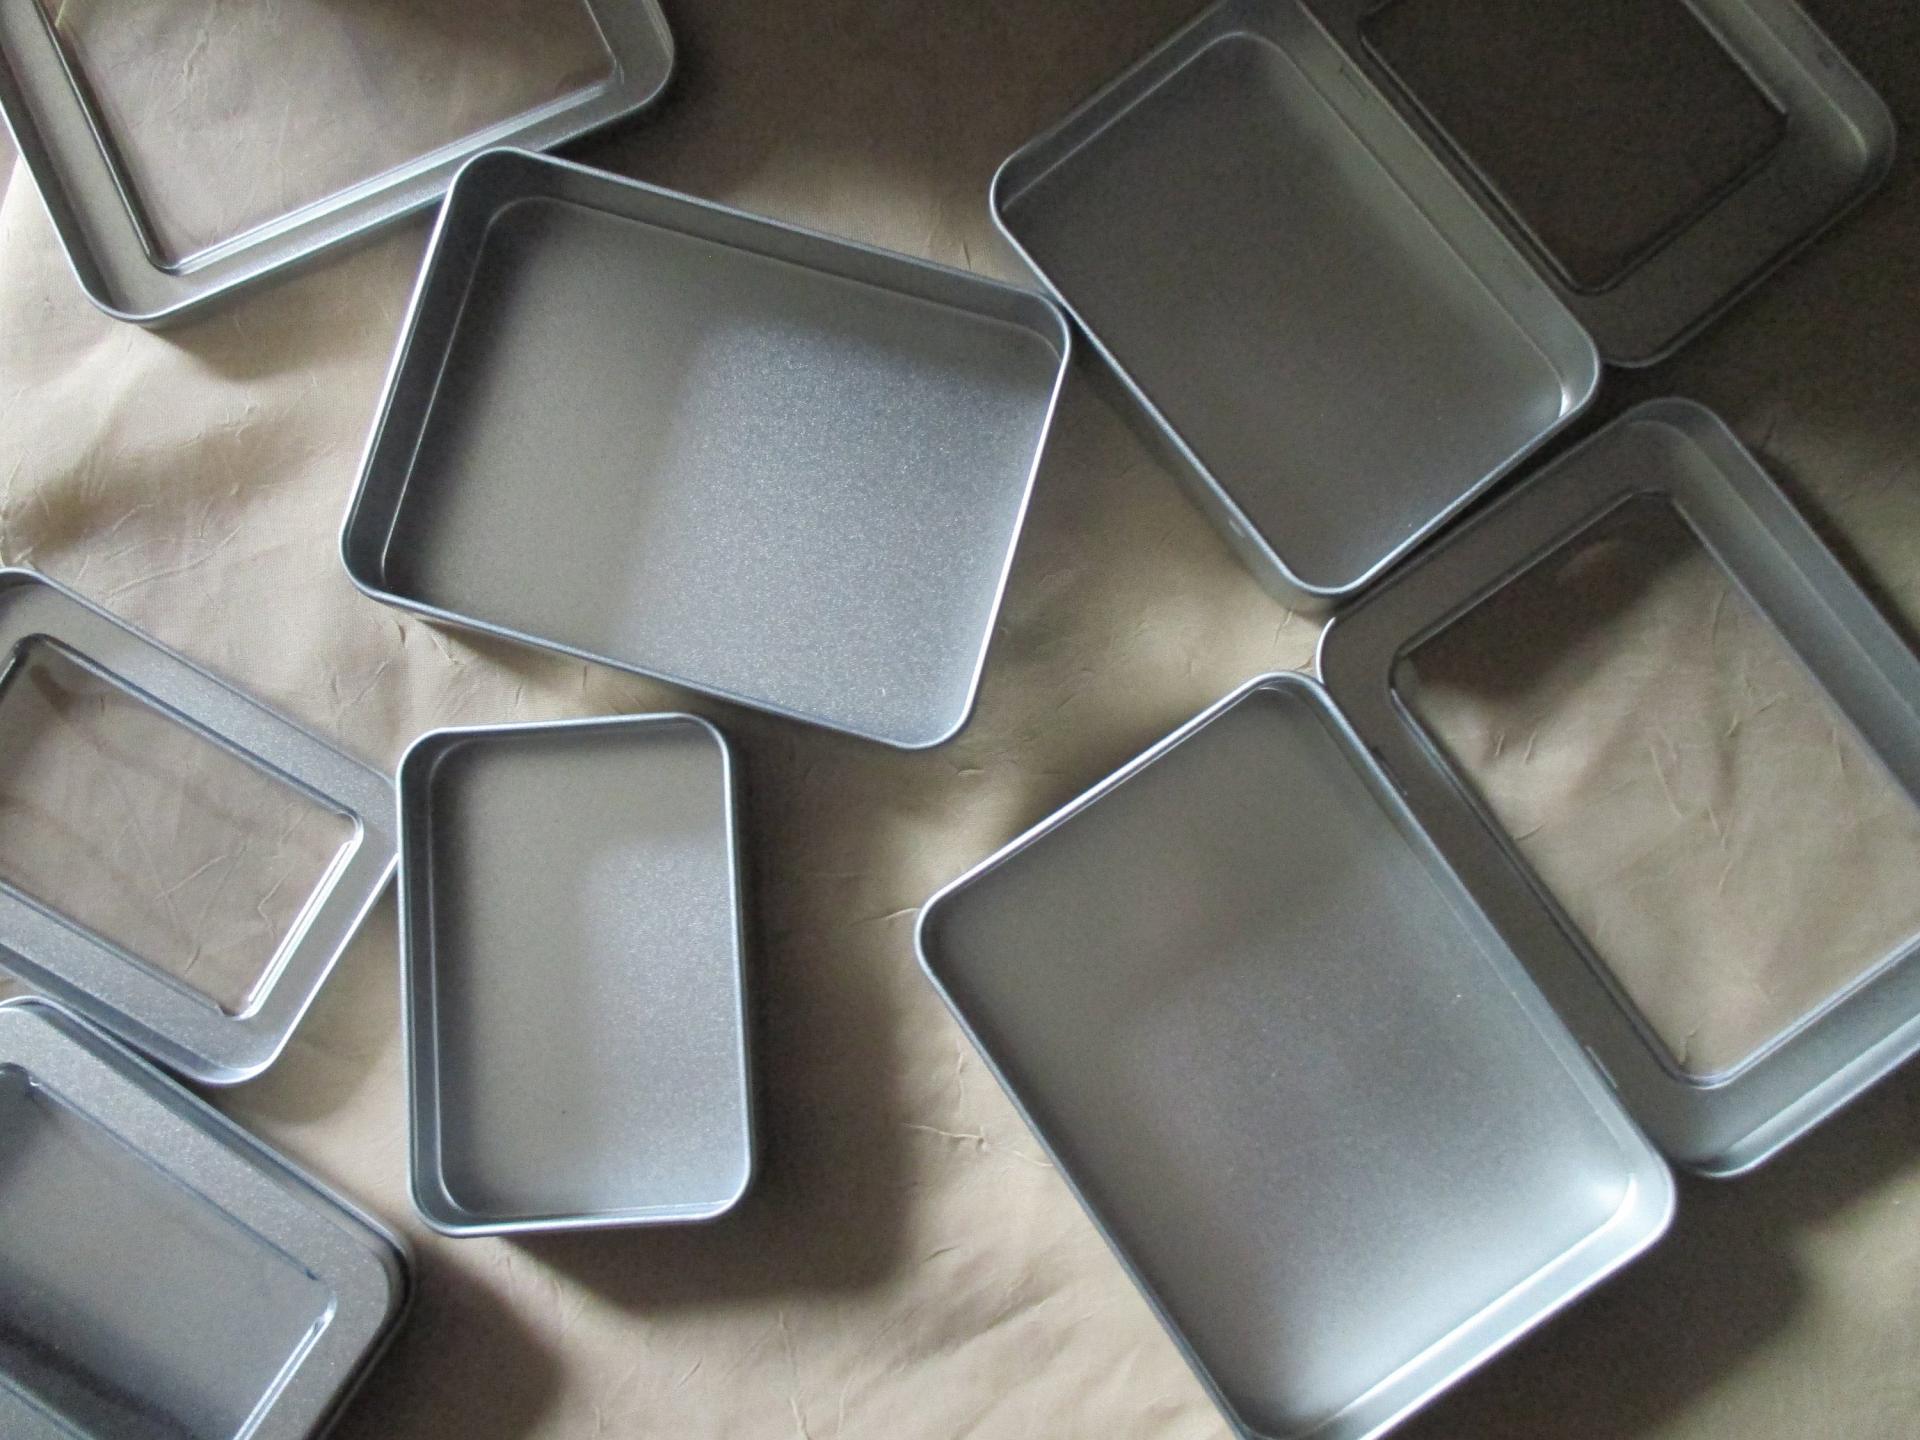 Silver and Black Window Tins, Tin Containers, multiple sizes - Window Lid, Craft Tin, Stash Container, Tin Box